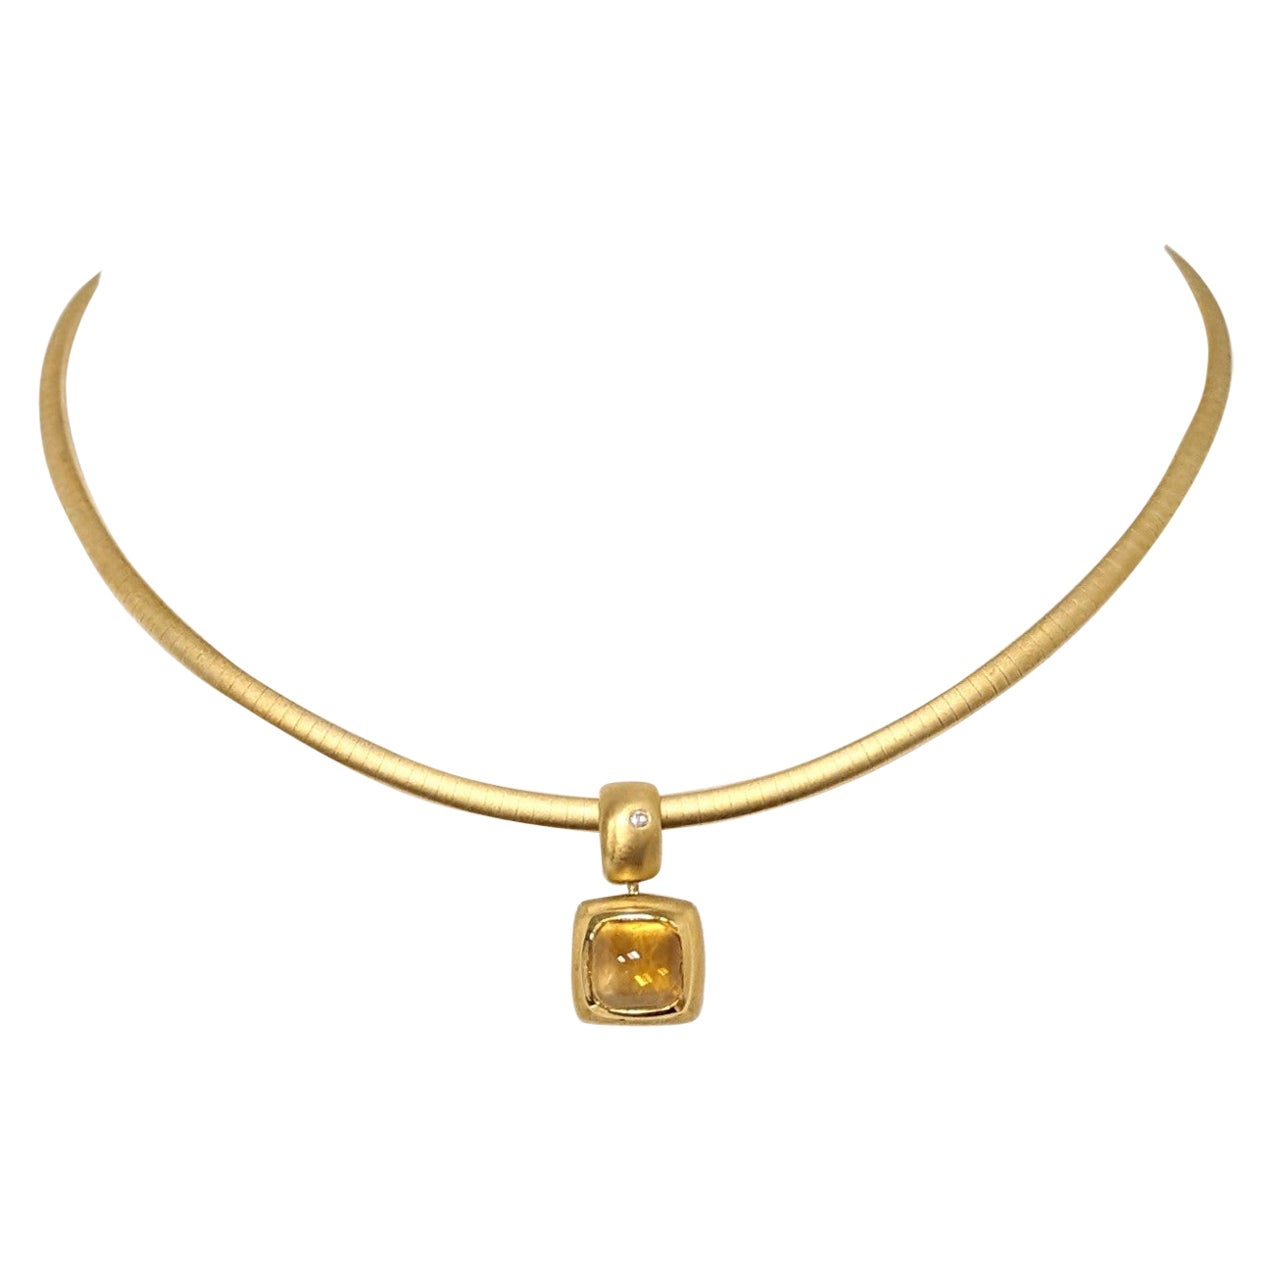 Estate H. Stern Citrine and White Diamond Pendant Necklace in 18K Yellow Gold